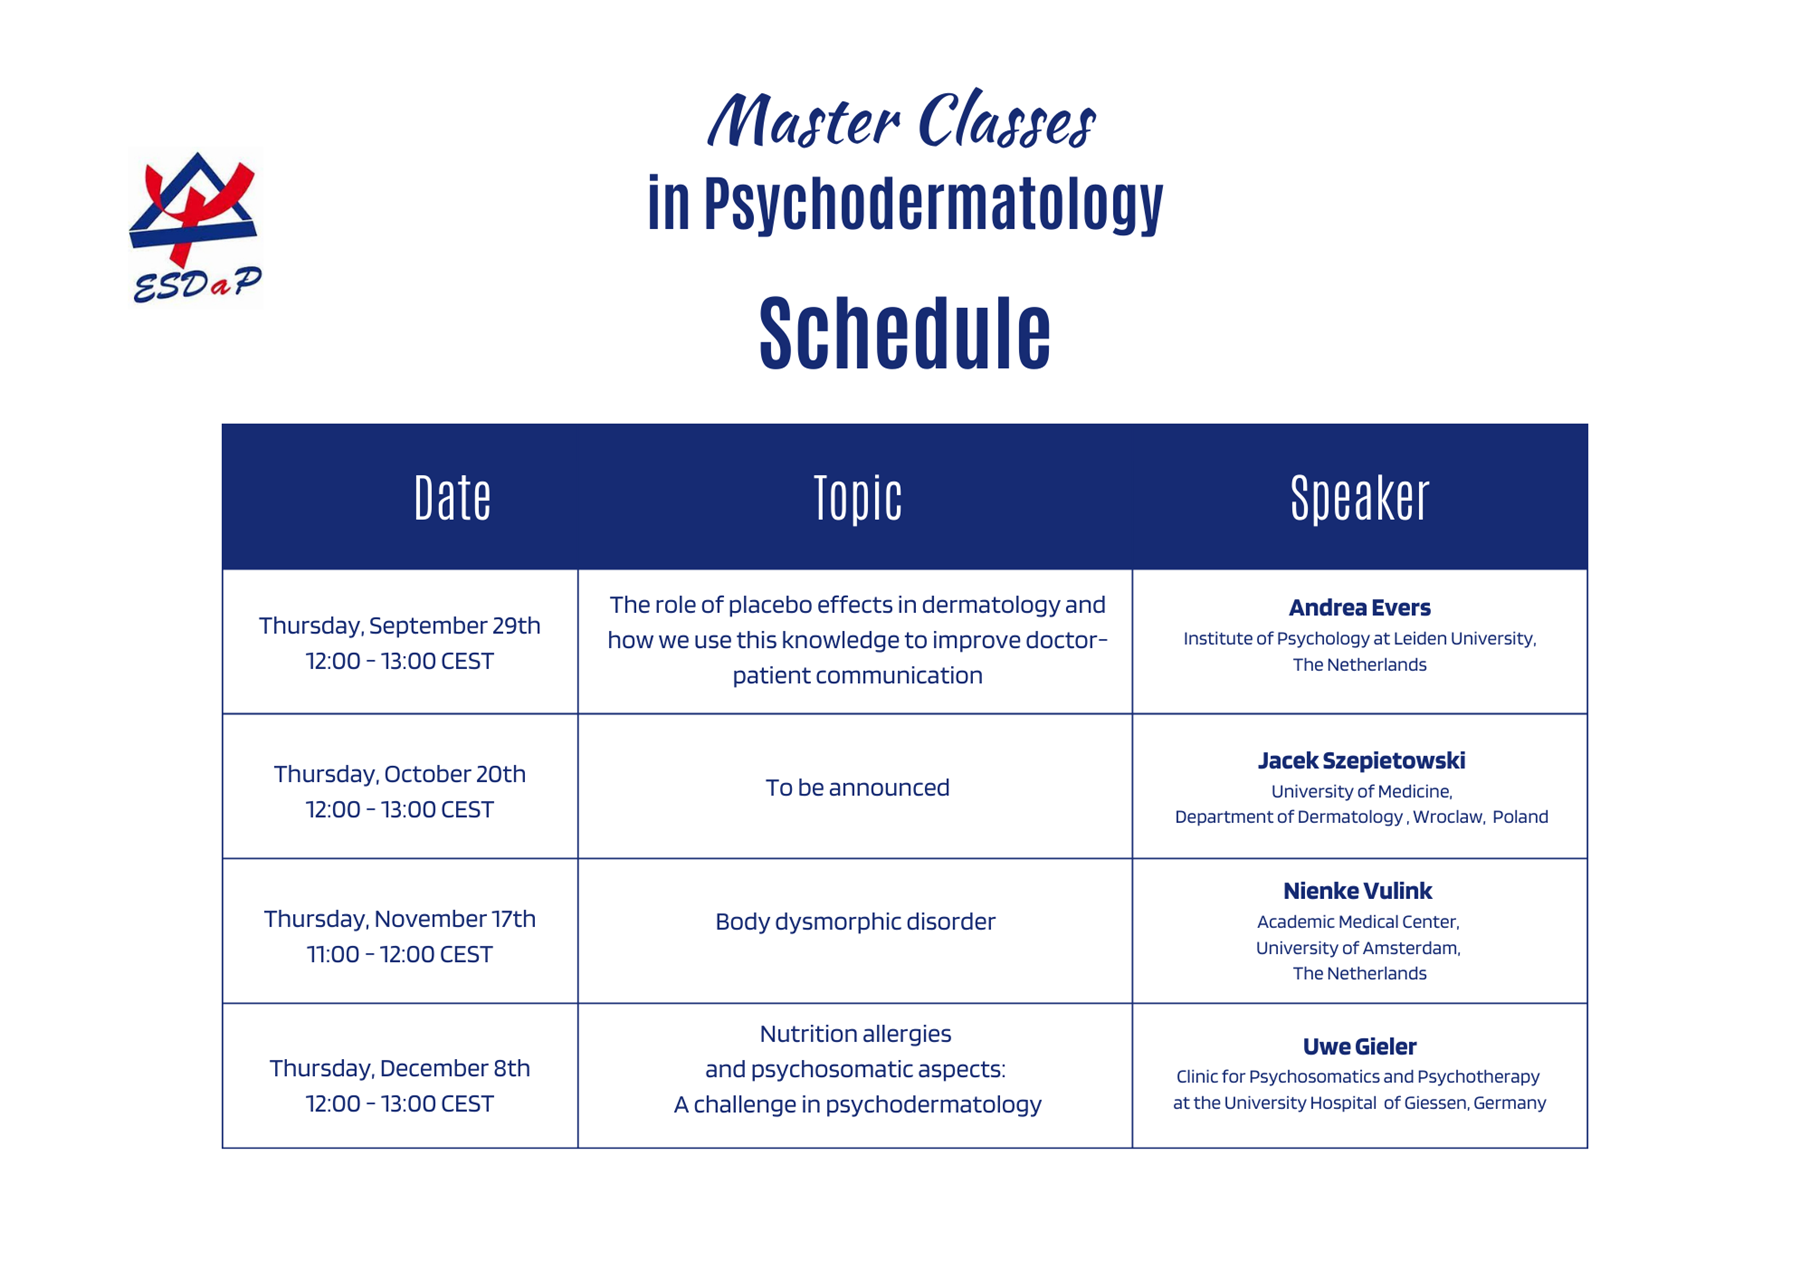 Schedule for Master Classes in Psychodermatology